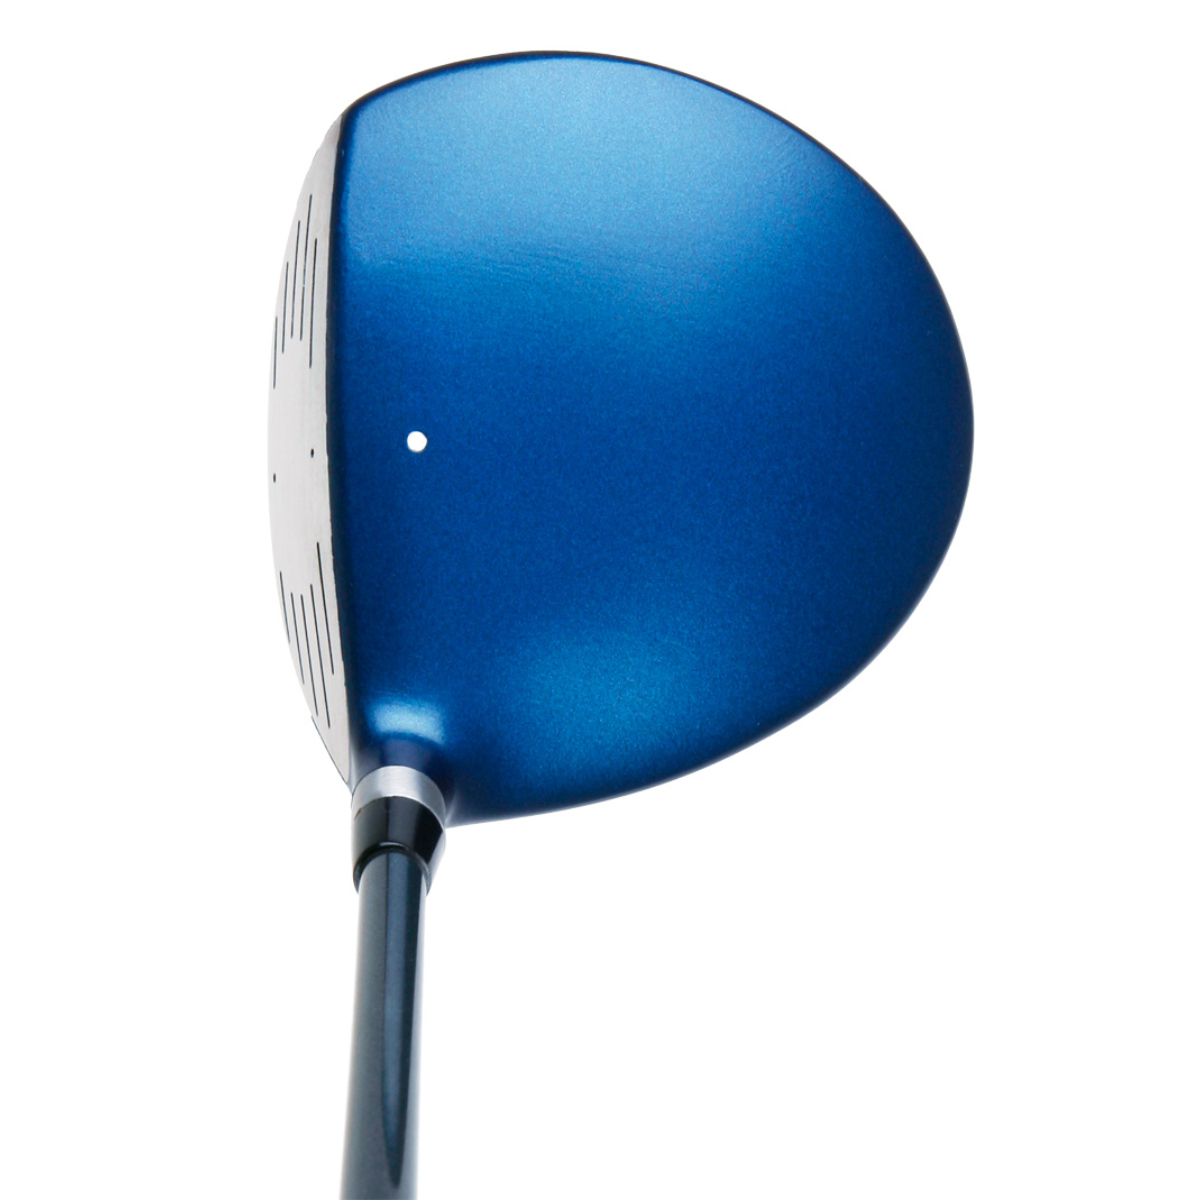 crown view of the Intech Behemoth Oversized Fairway Wood with white alignment dot